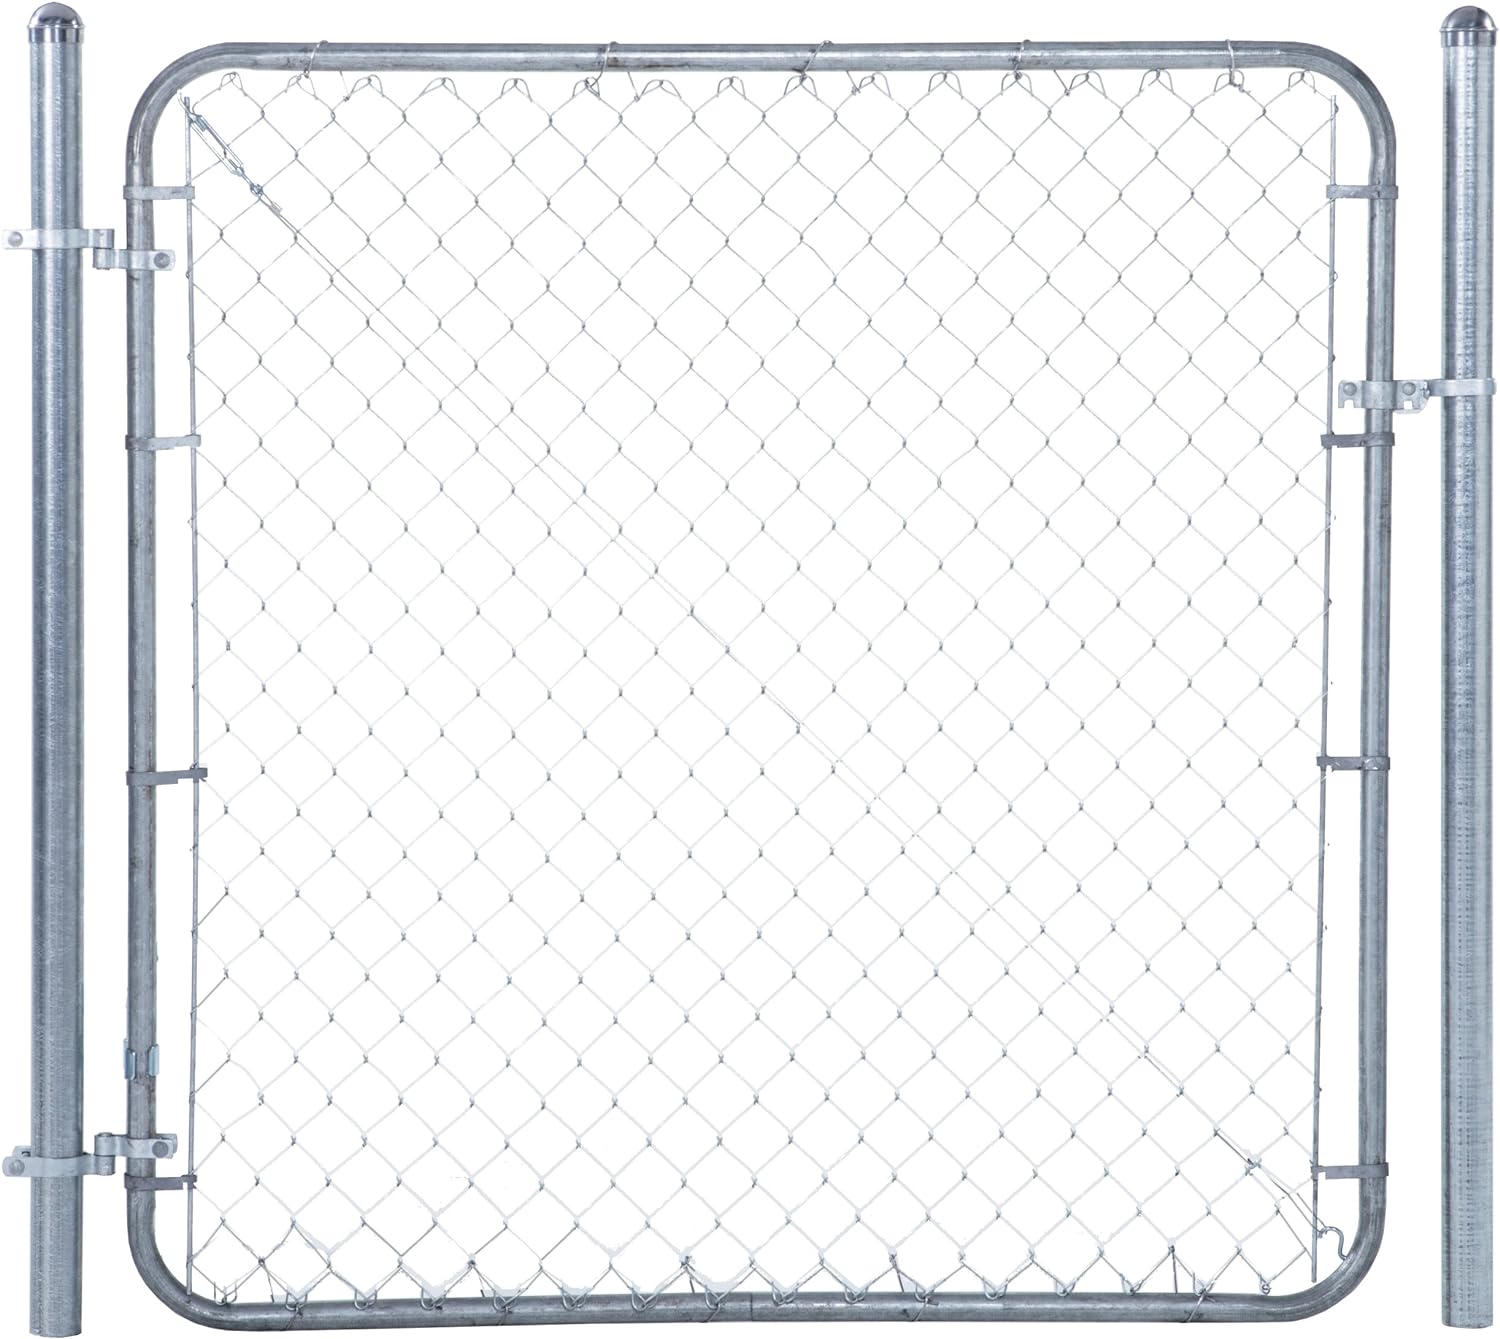 Adjust-A-Gate Fit-Right Chain Link Fence Walk-through Gate Kit (24"-72" wide x 4' high)